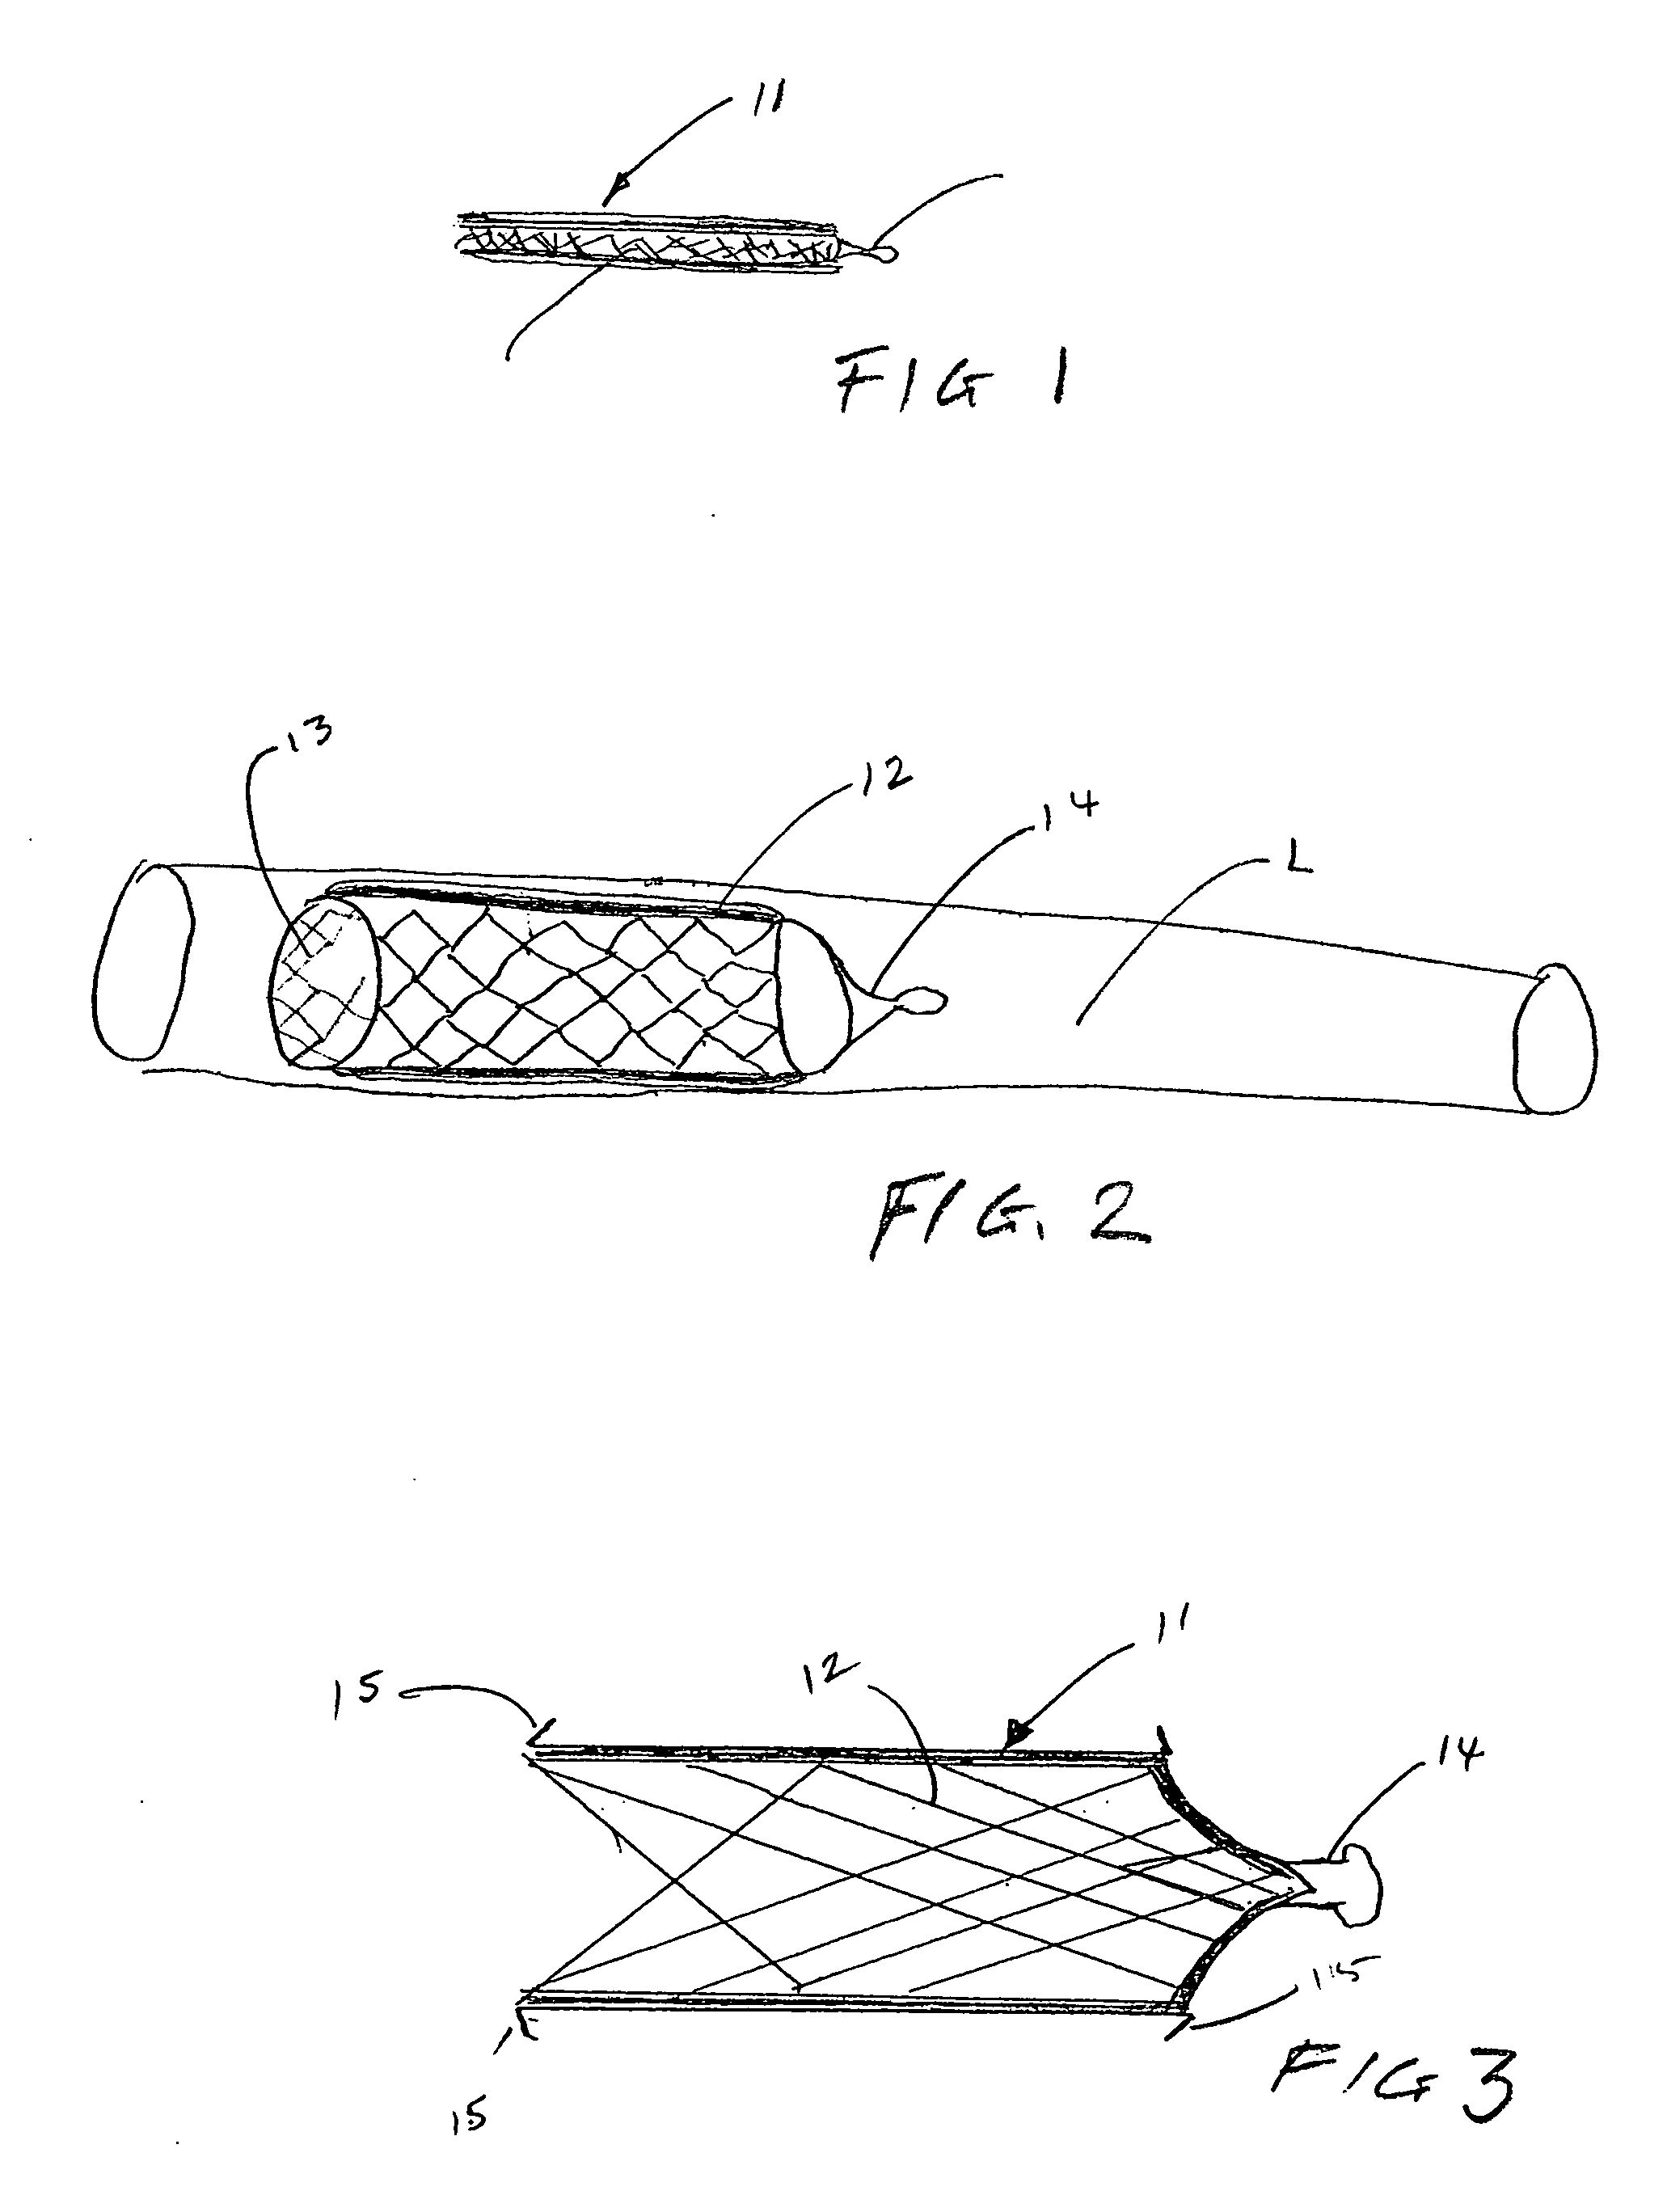 Implantable systems and stents containing cells for therapeutic uses